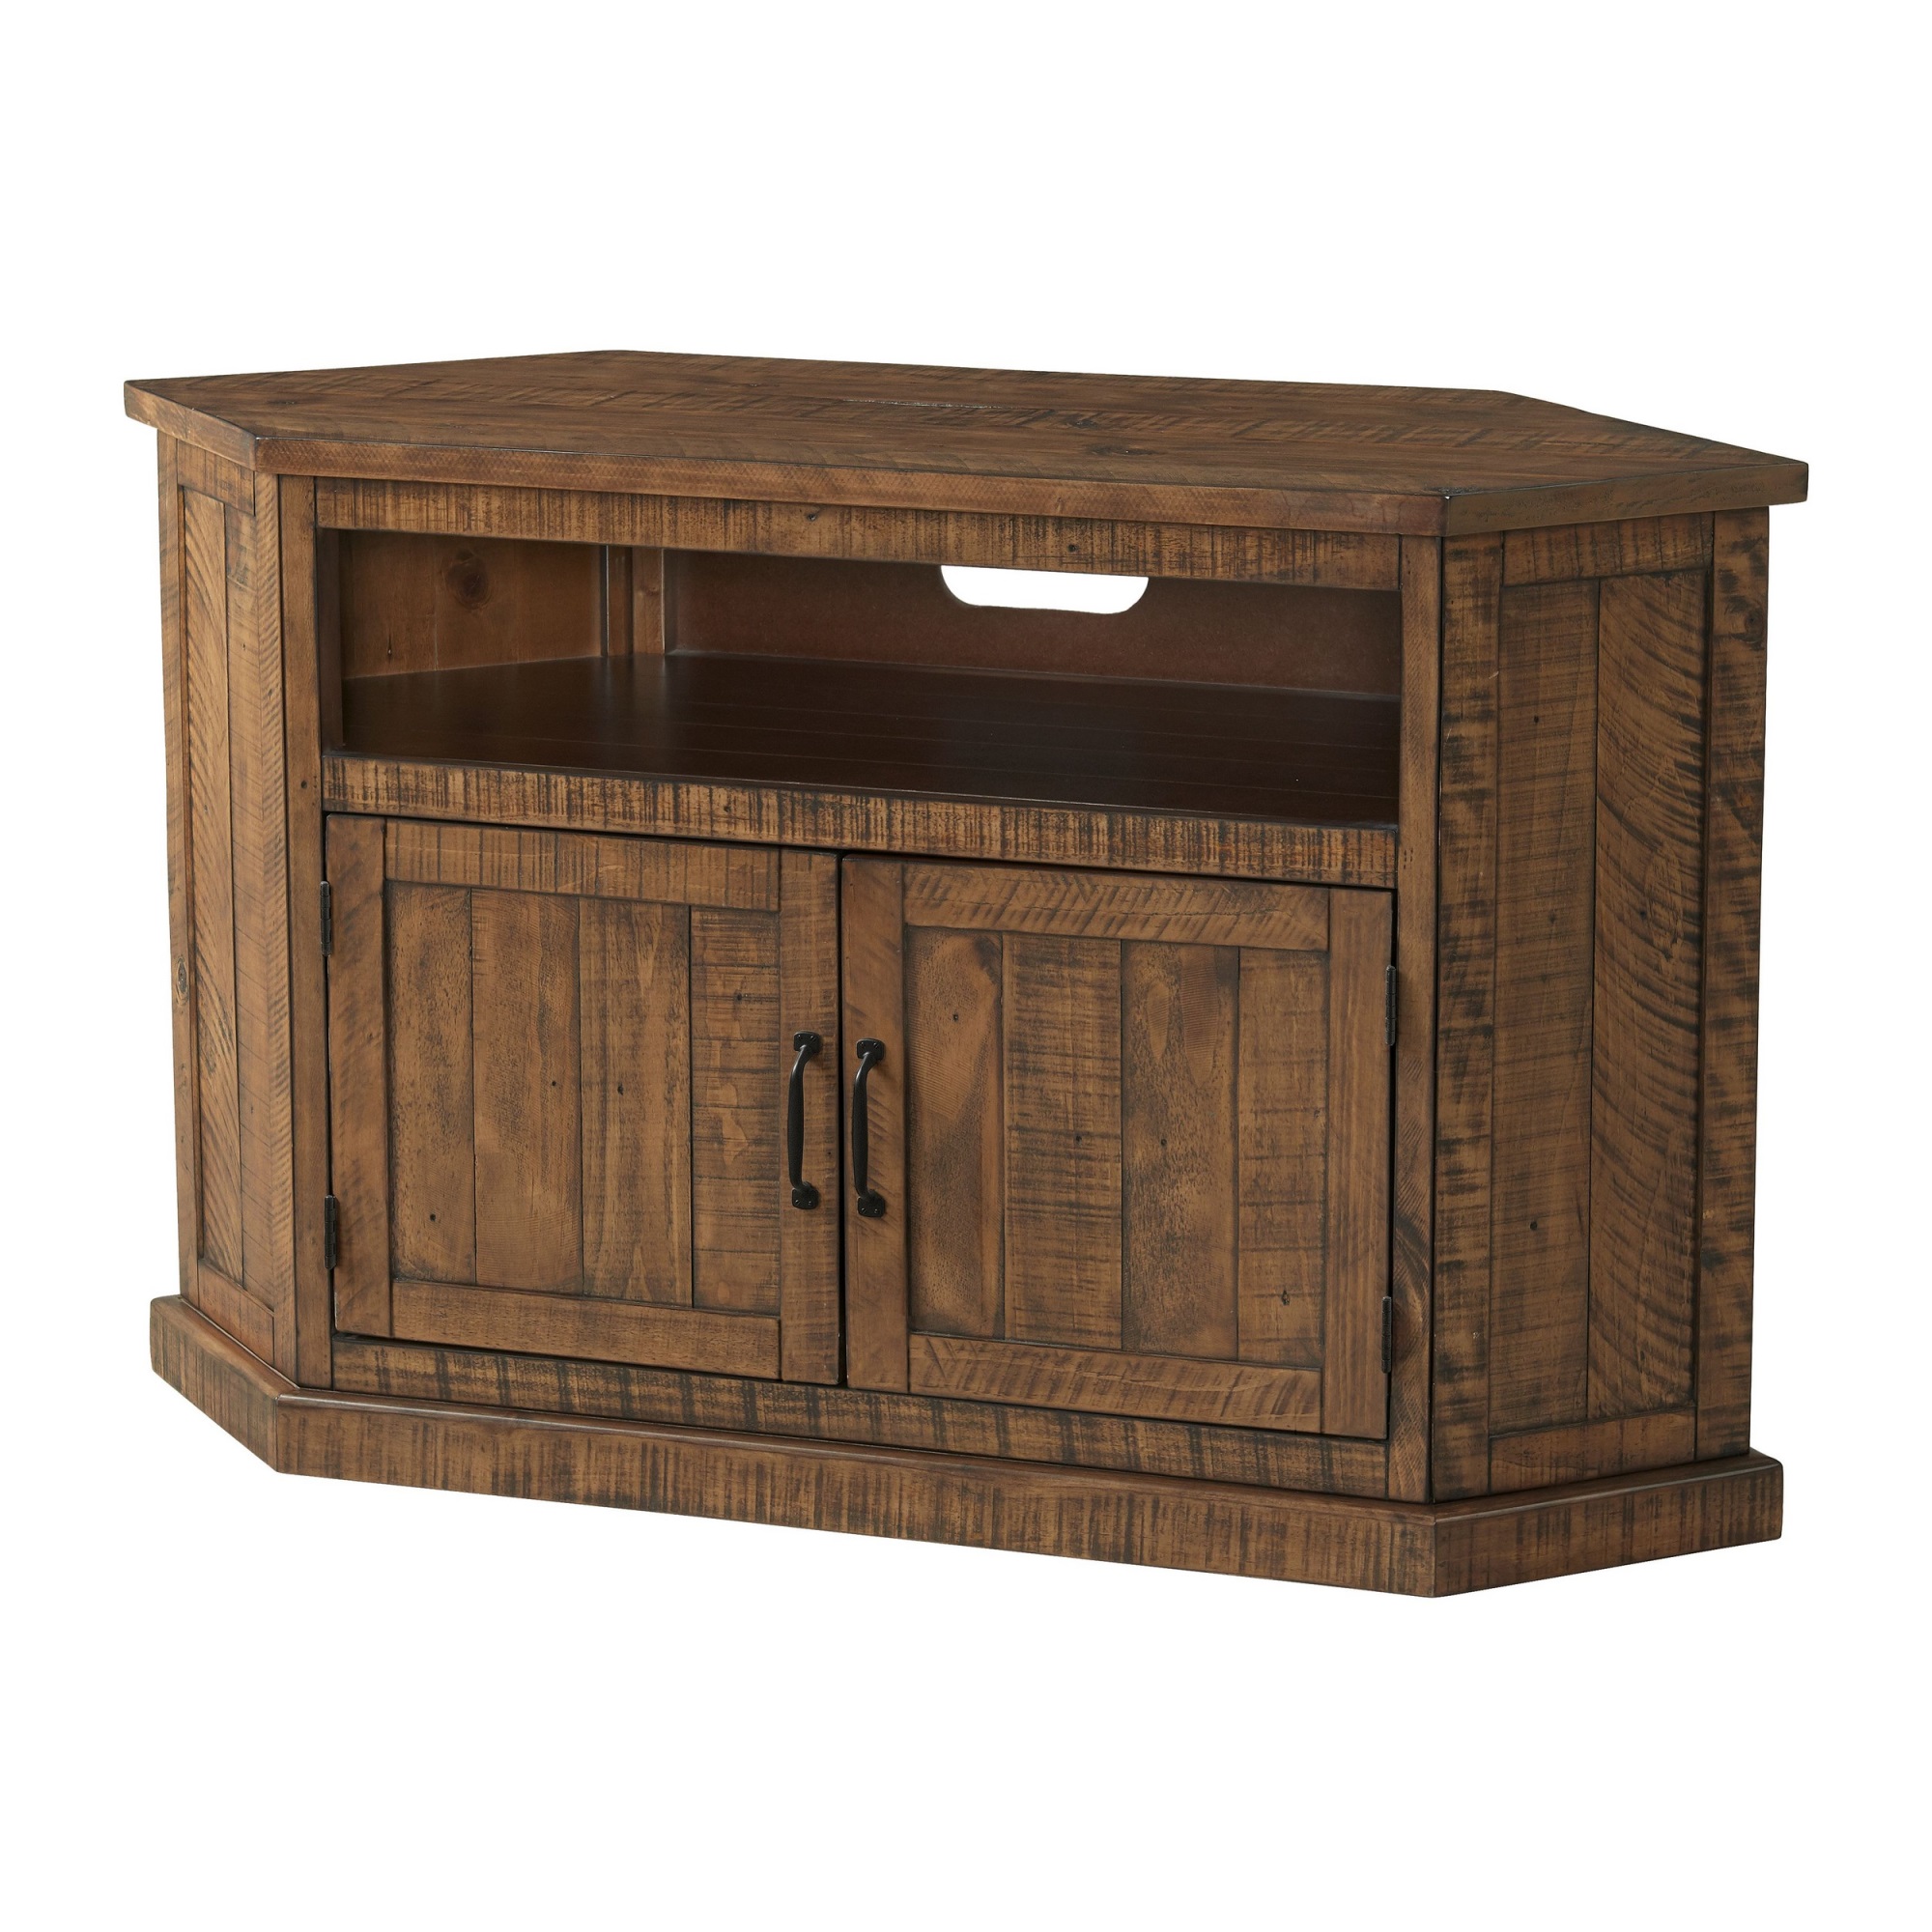 BenJara Alexa 50 Inch TV Corner Entertainment Console, Cubby, Cabinet, Brown Stained